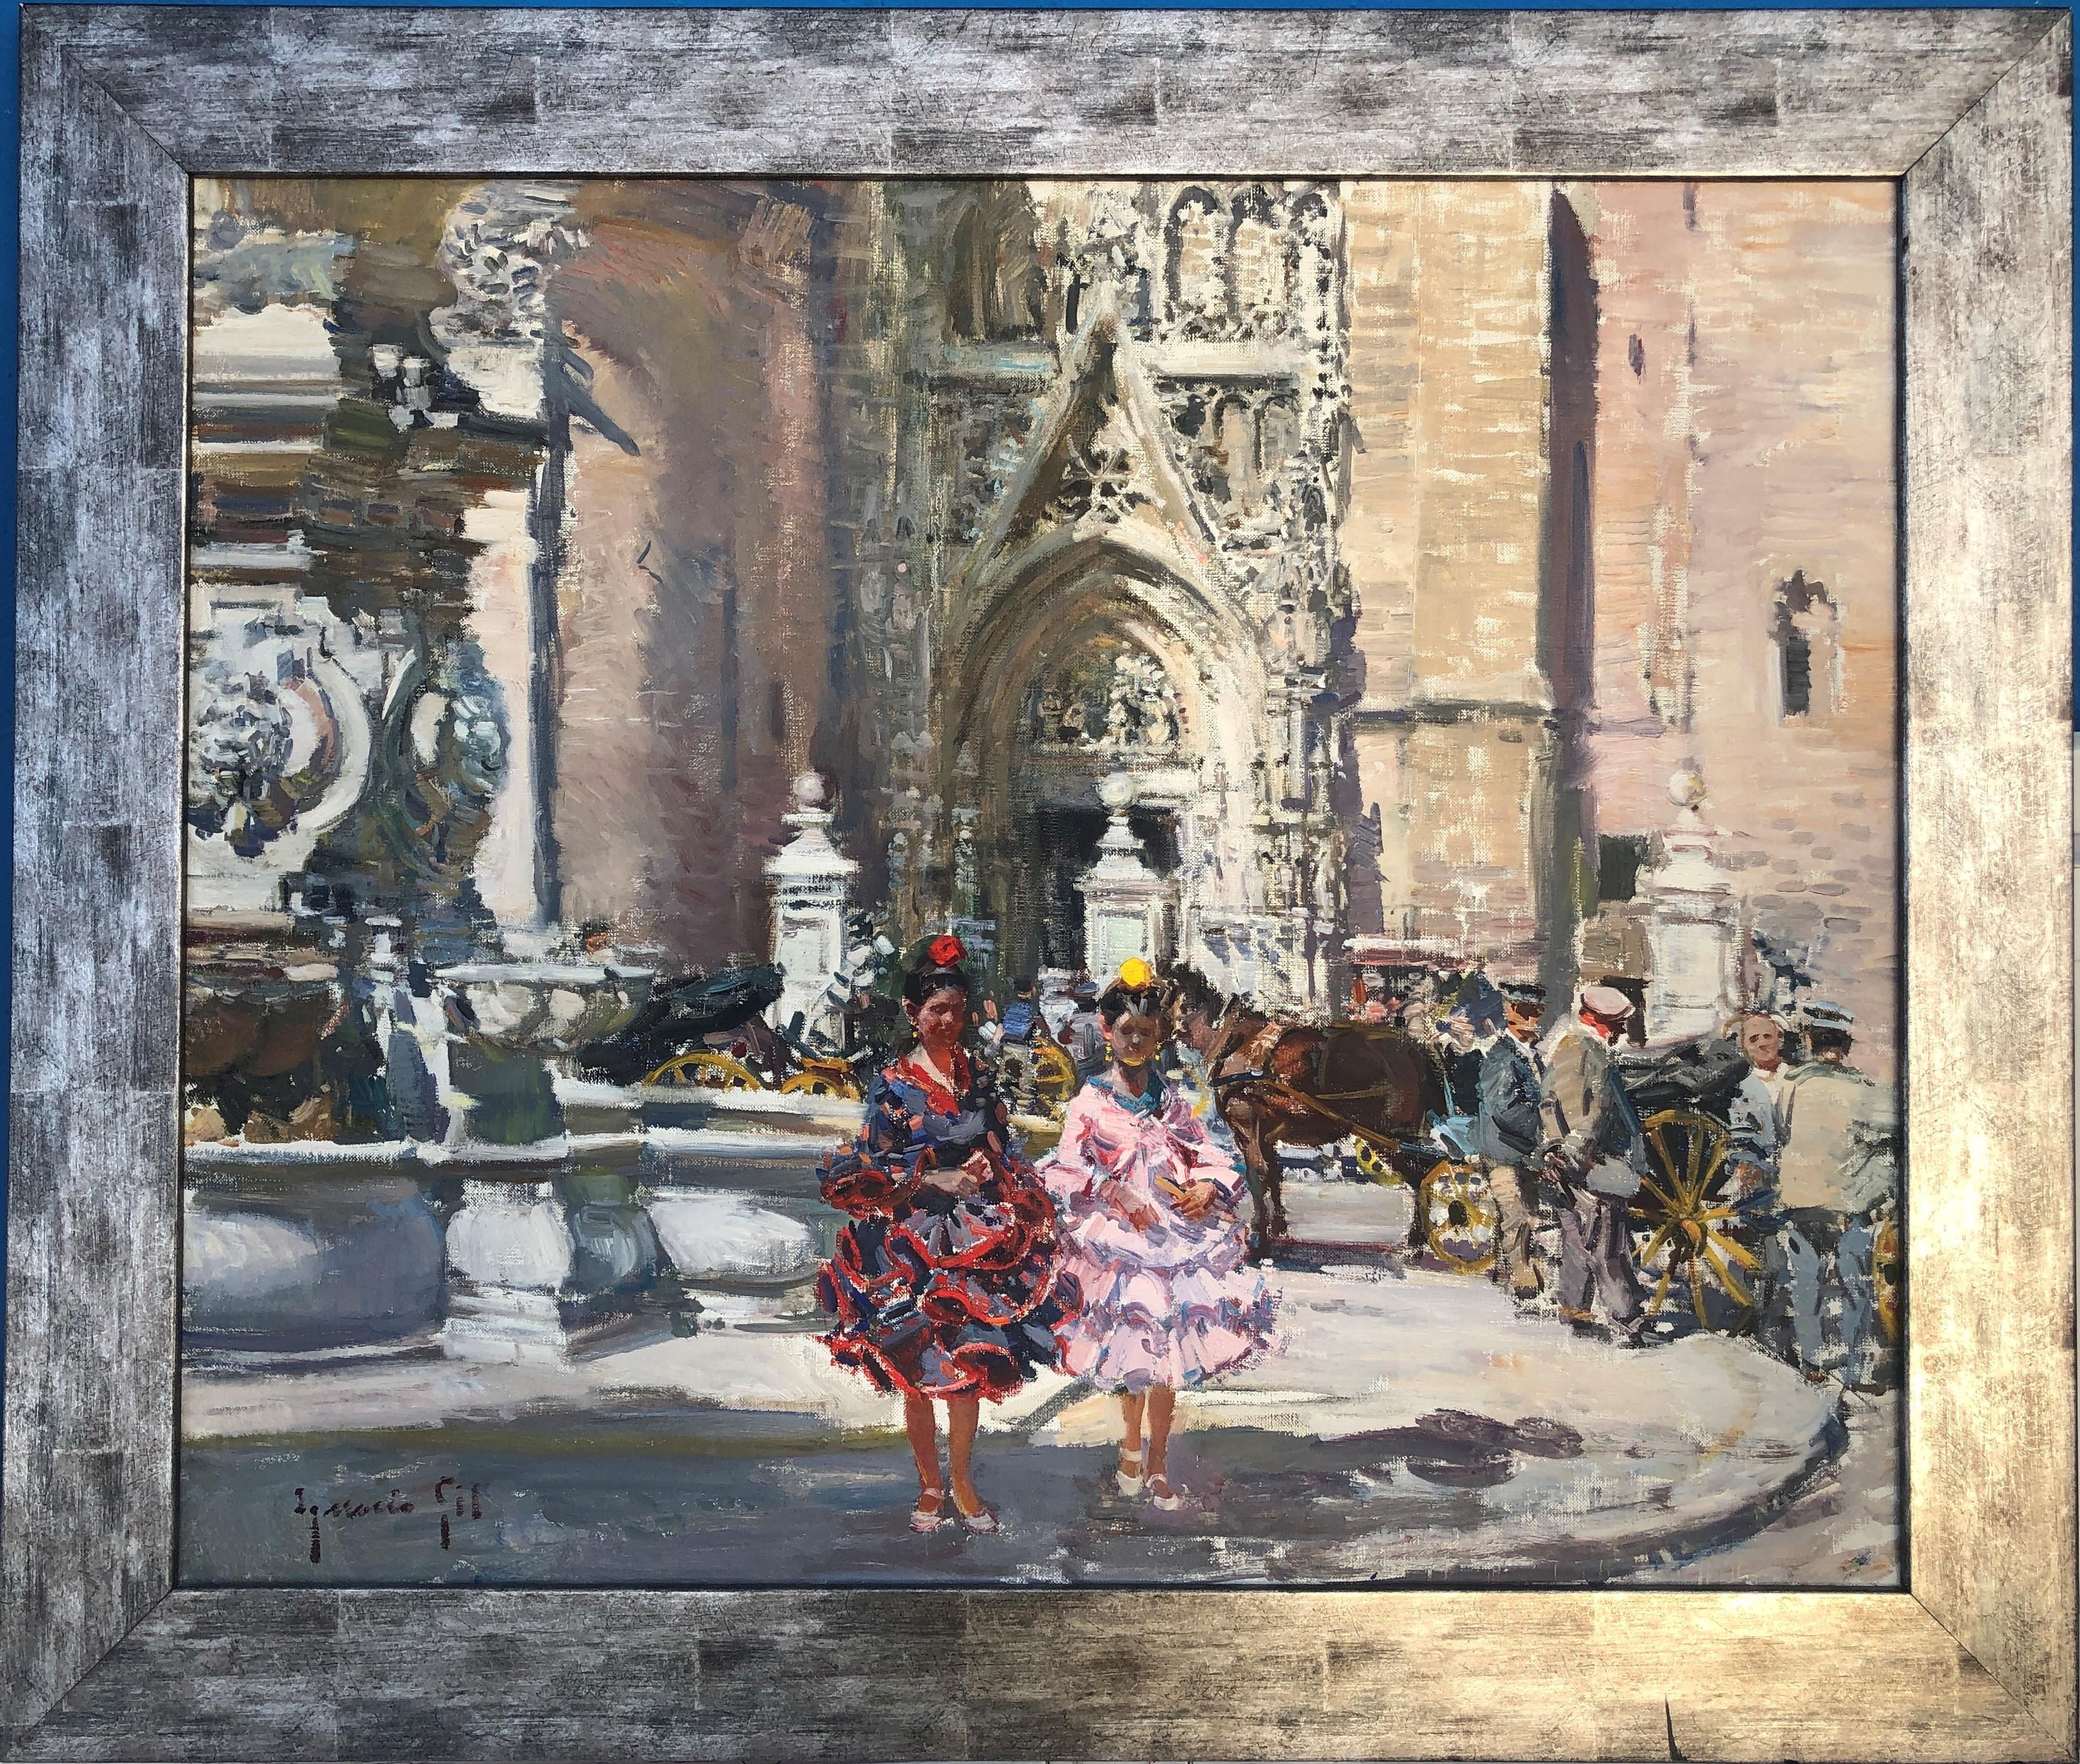 Cathedral of Sevilla Spain oil on canvas painting landscape - Painting by Ignacio Gil Sala